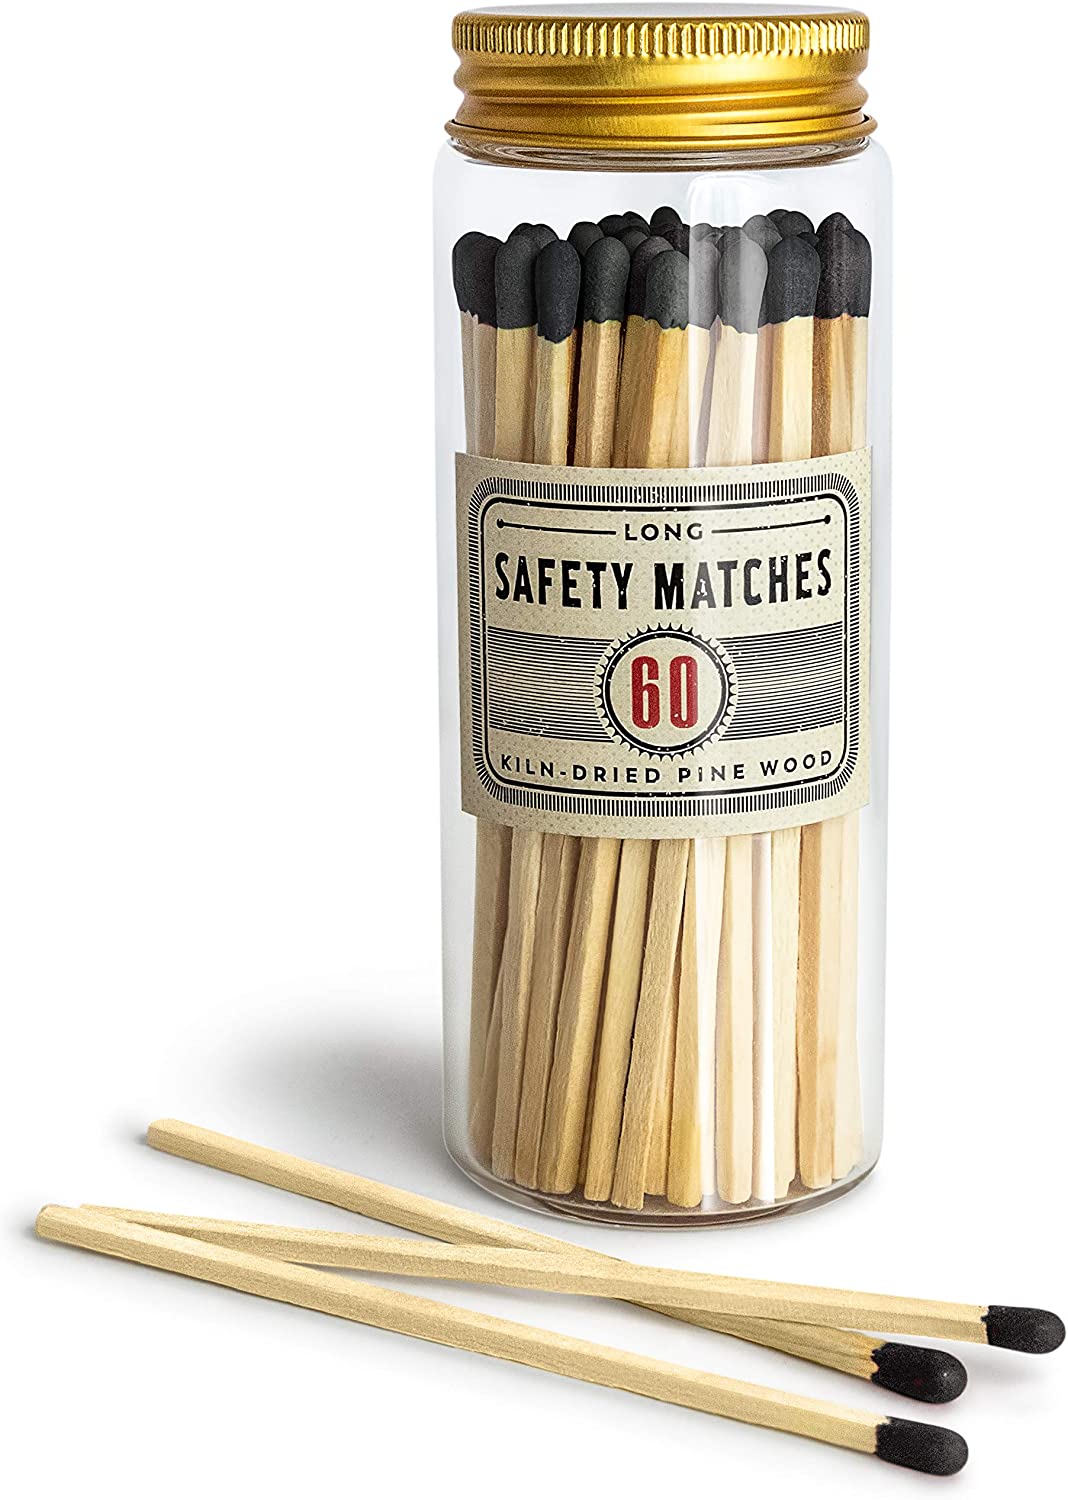 Premium Long Matches for Candles, Decorative Matches in Apothecary Jar, Colorful Matches Long Wooden, Safety Matches, Wooden Matches, Long Stick